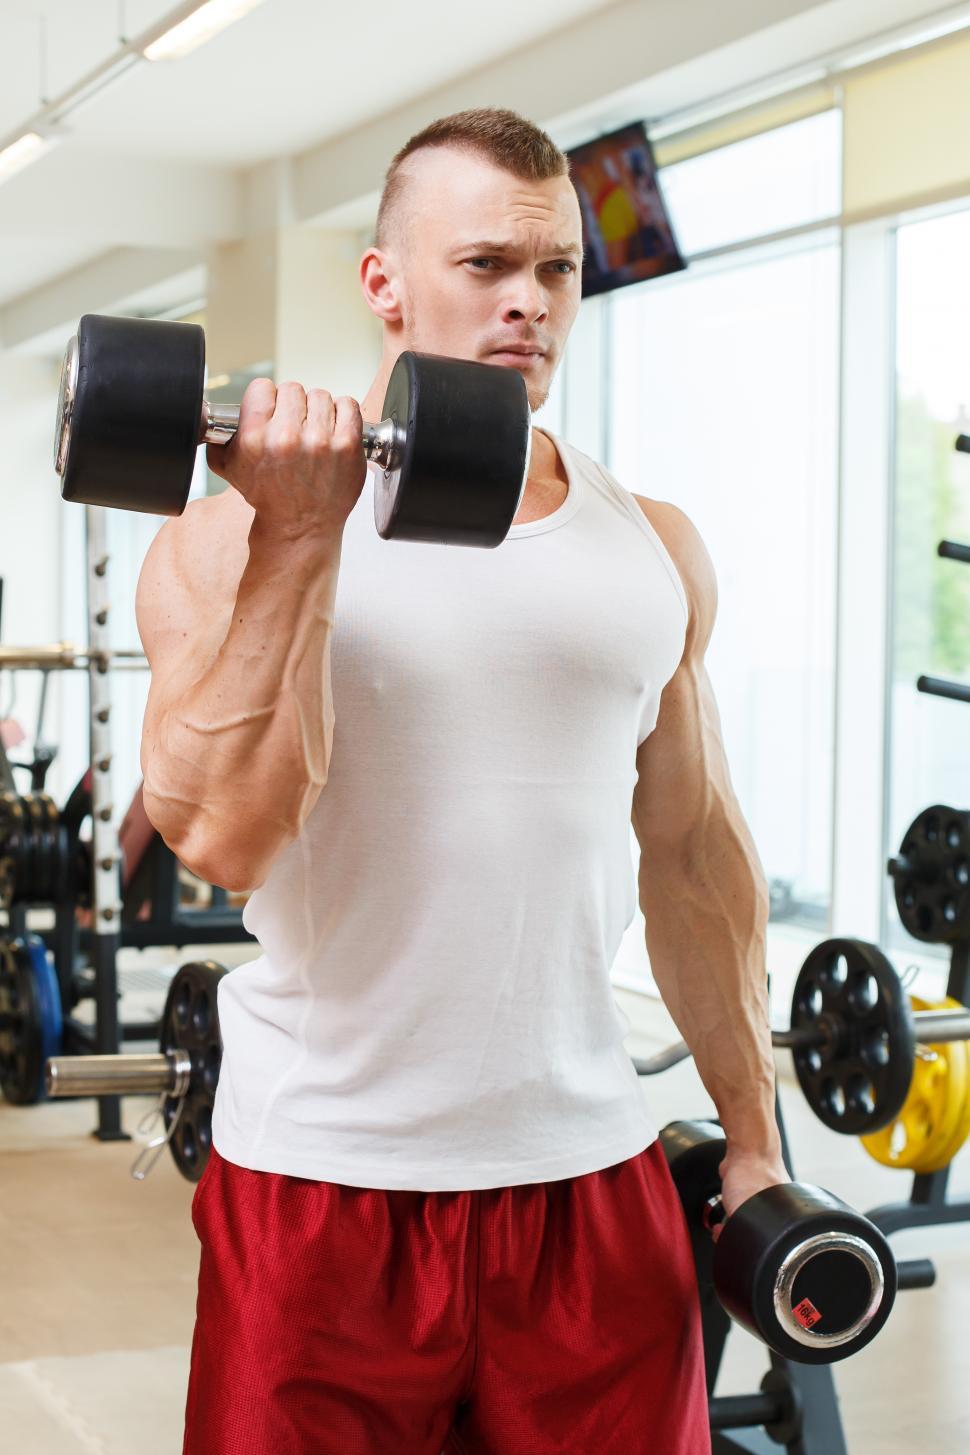 Free Image of Gym. Weightlifter during workout 